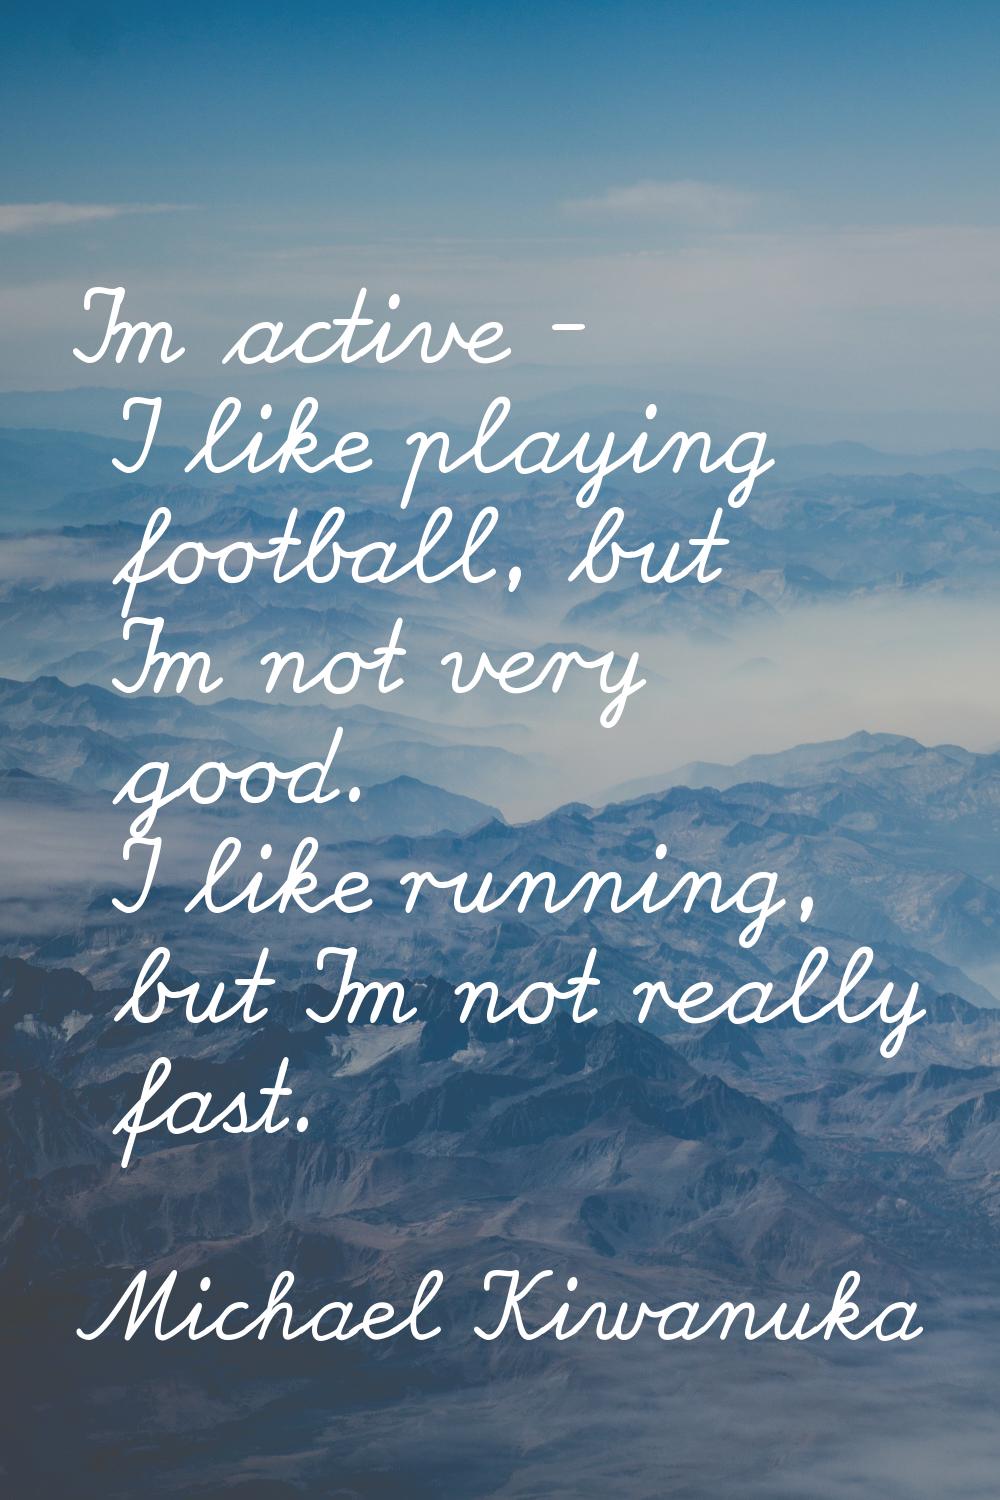 I'm active - I like playing football, but I'm not very good. I like running, but I'm not really fas